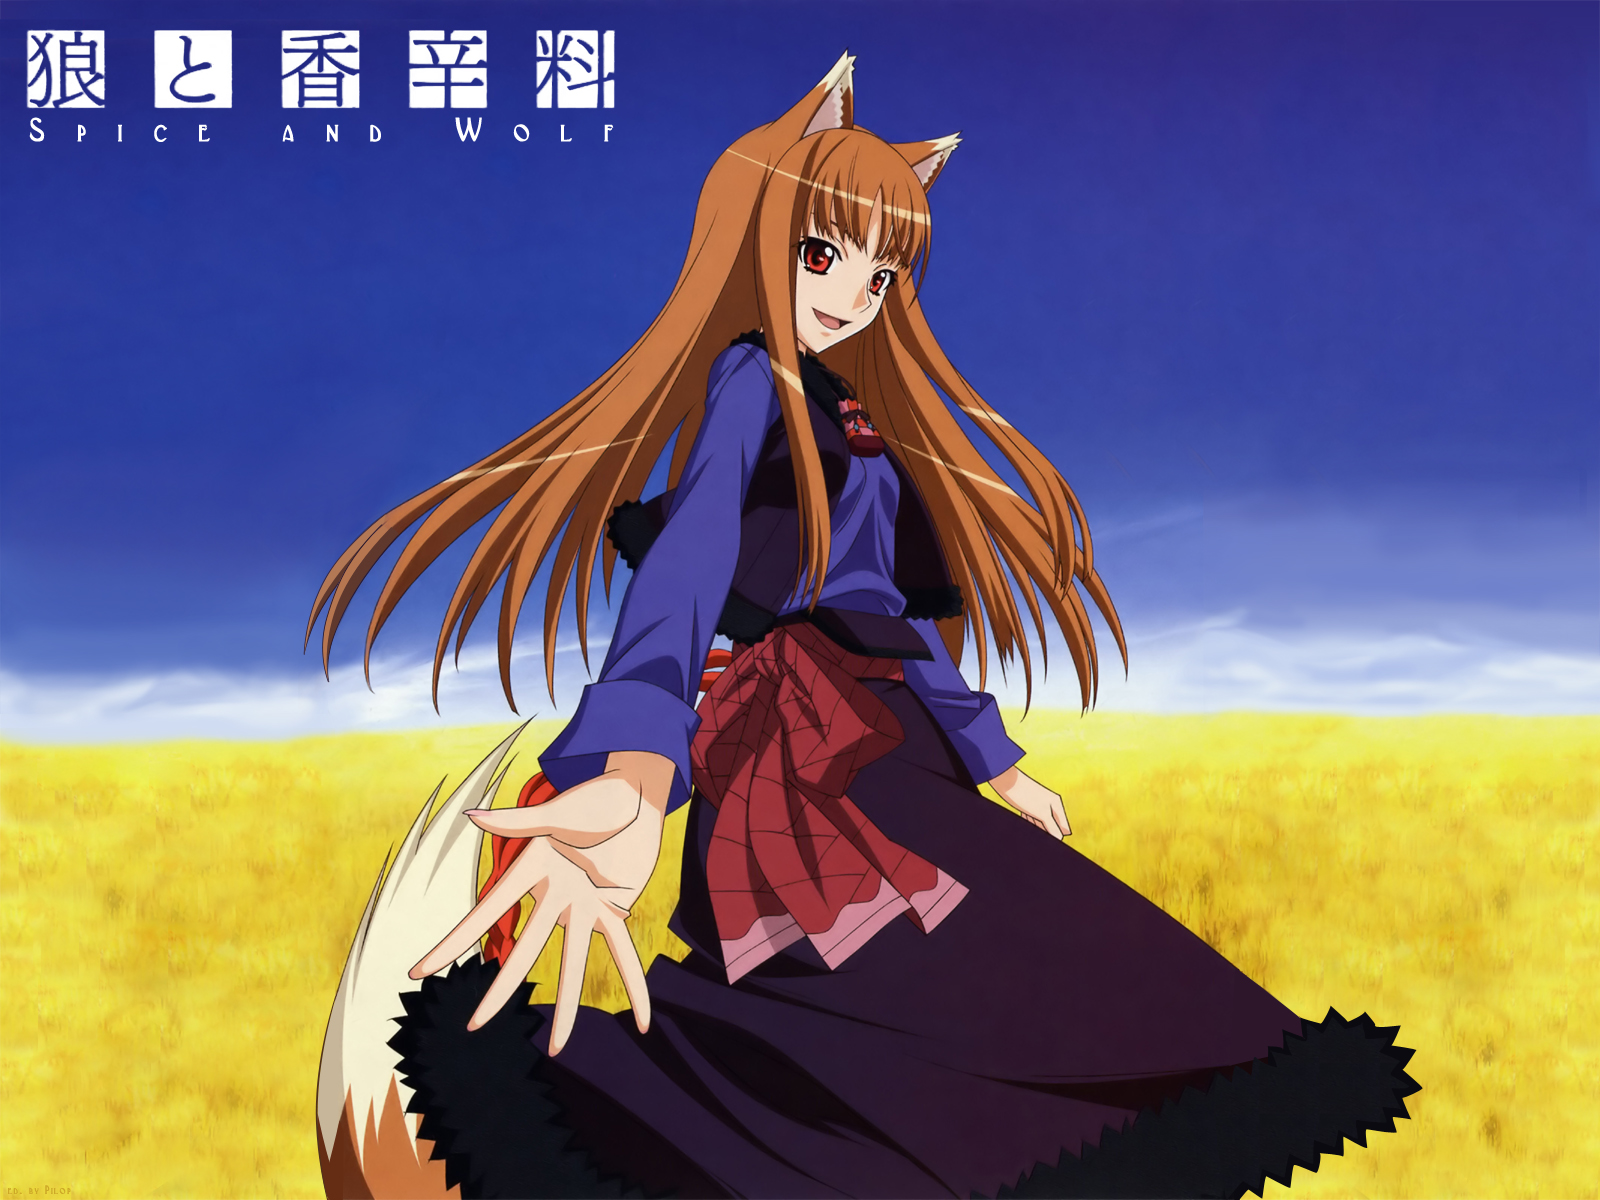 Holo, the character from Spice & Wolf, with brown hair, animal ears, red eyes, smiling, wearing a skirt, and with a tail.